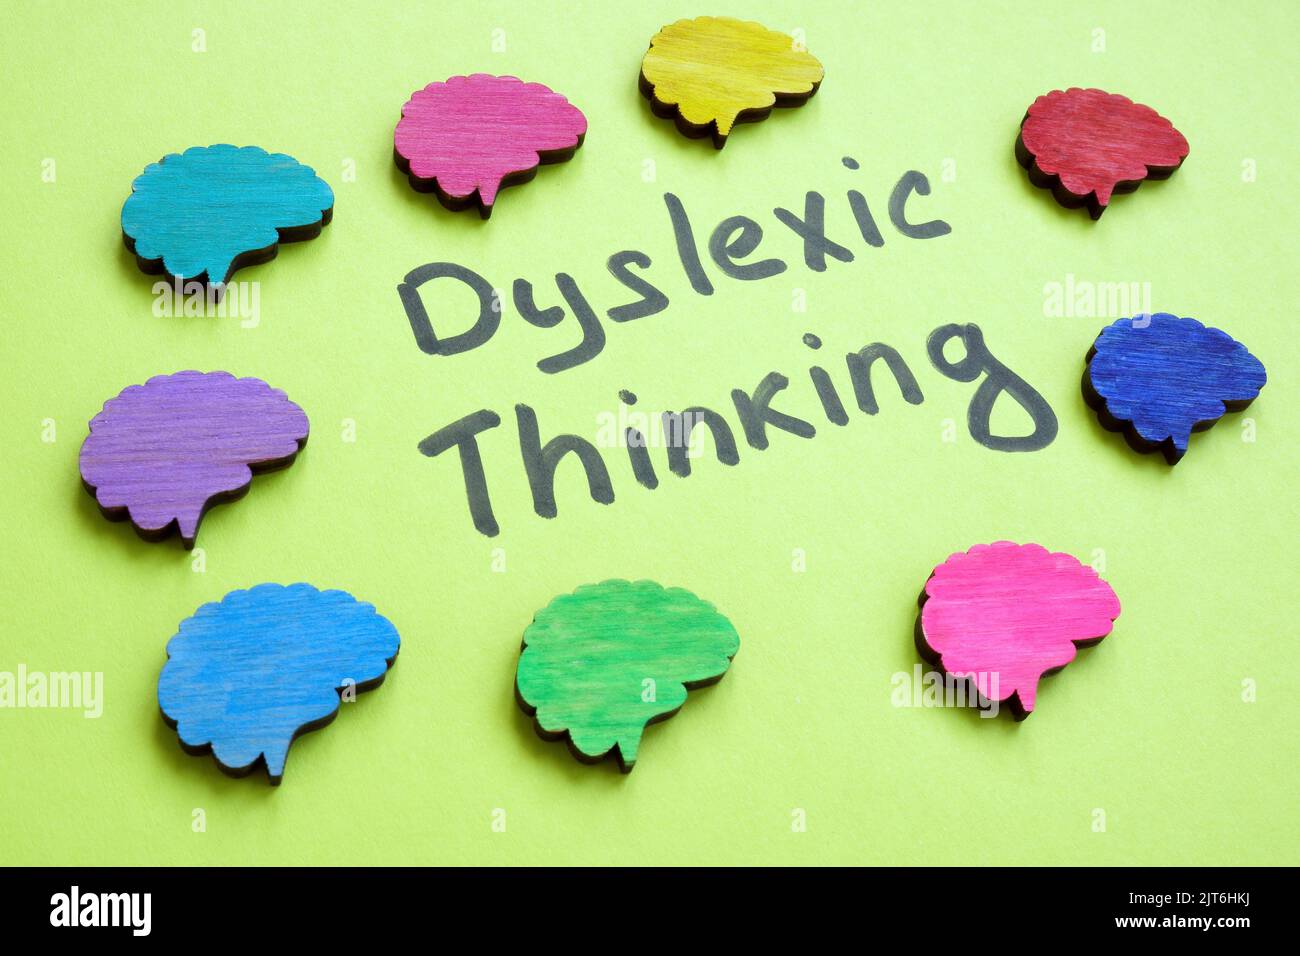 Dyslexic thinking sign and colorful brains around. Stock Photo